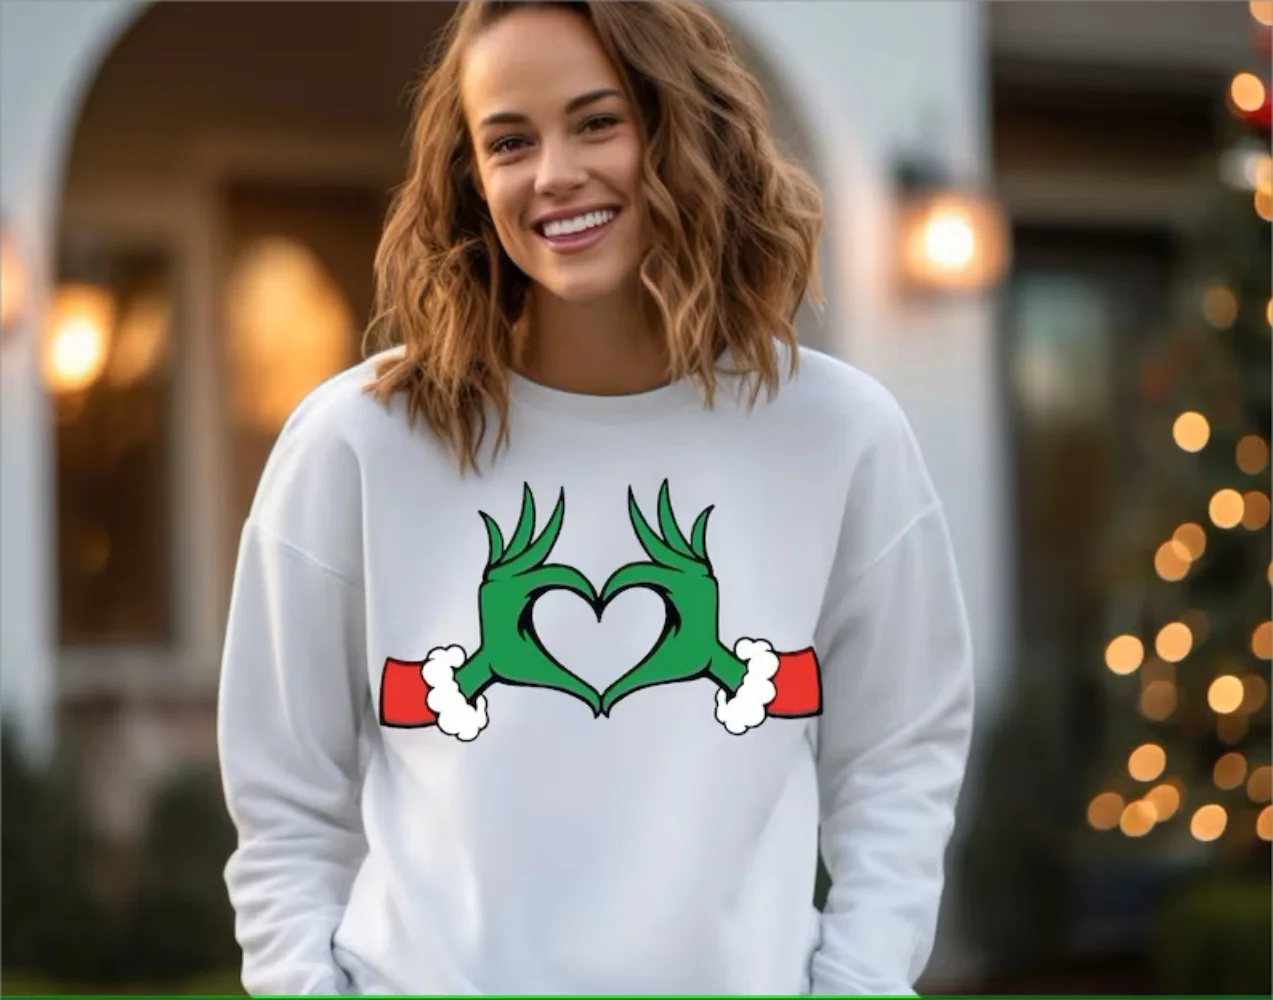 Trending Now Heart Hands Graphic Christmas Shirt Cute Funny Love Graphic Tees Matching Family Sweatshirt Xmas Holiday T-Shirt